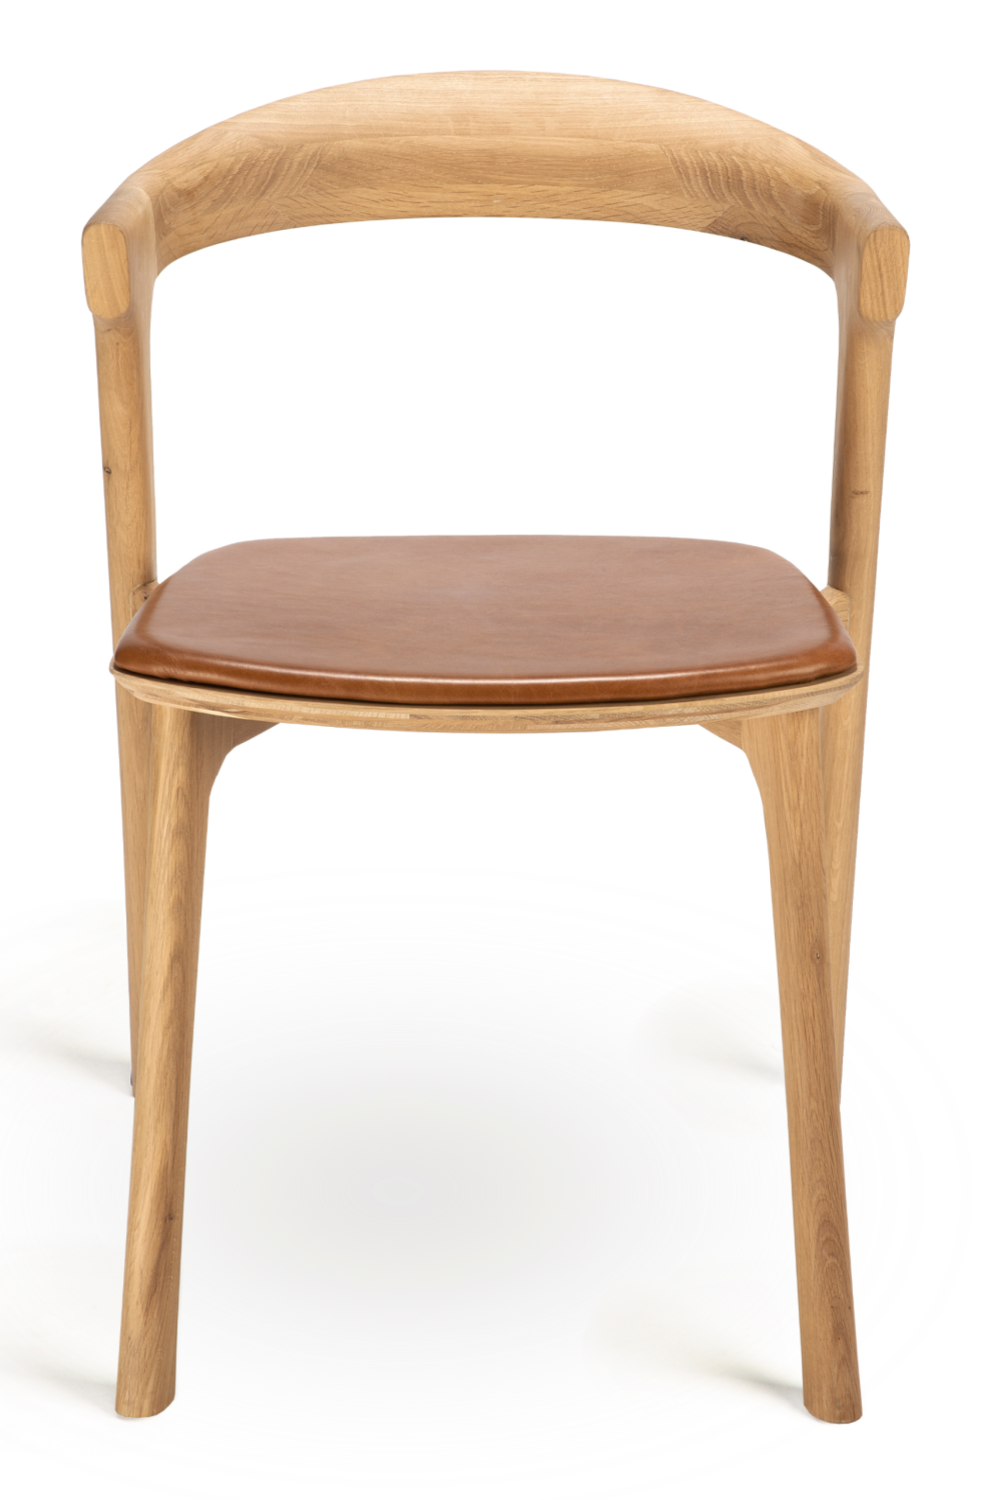 Image of Cushioned Scandinavian  Dining Chair | Ethnicraft Bok